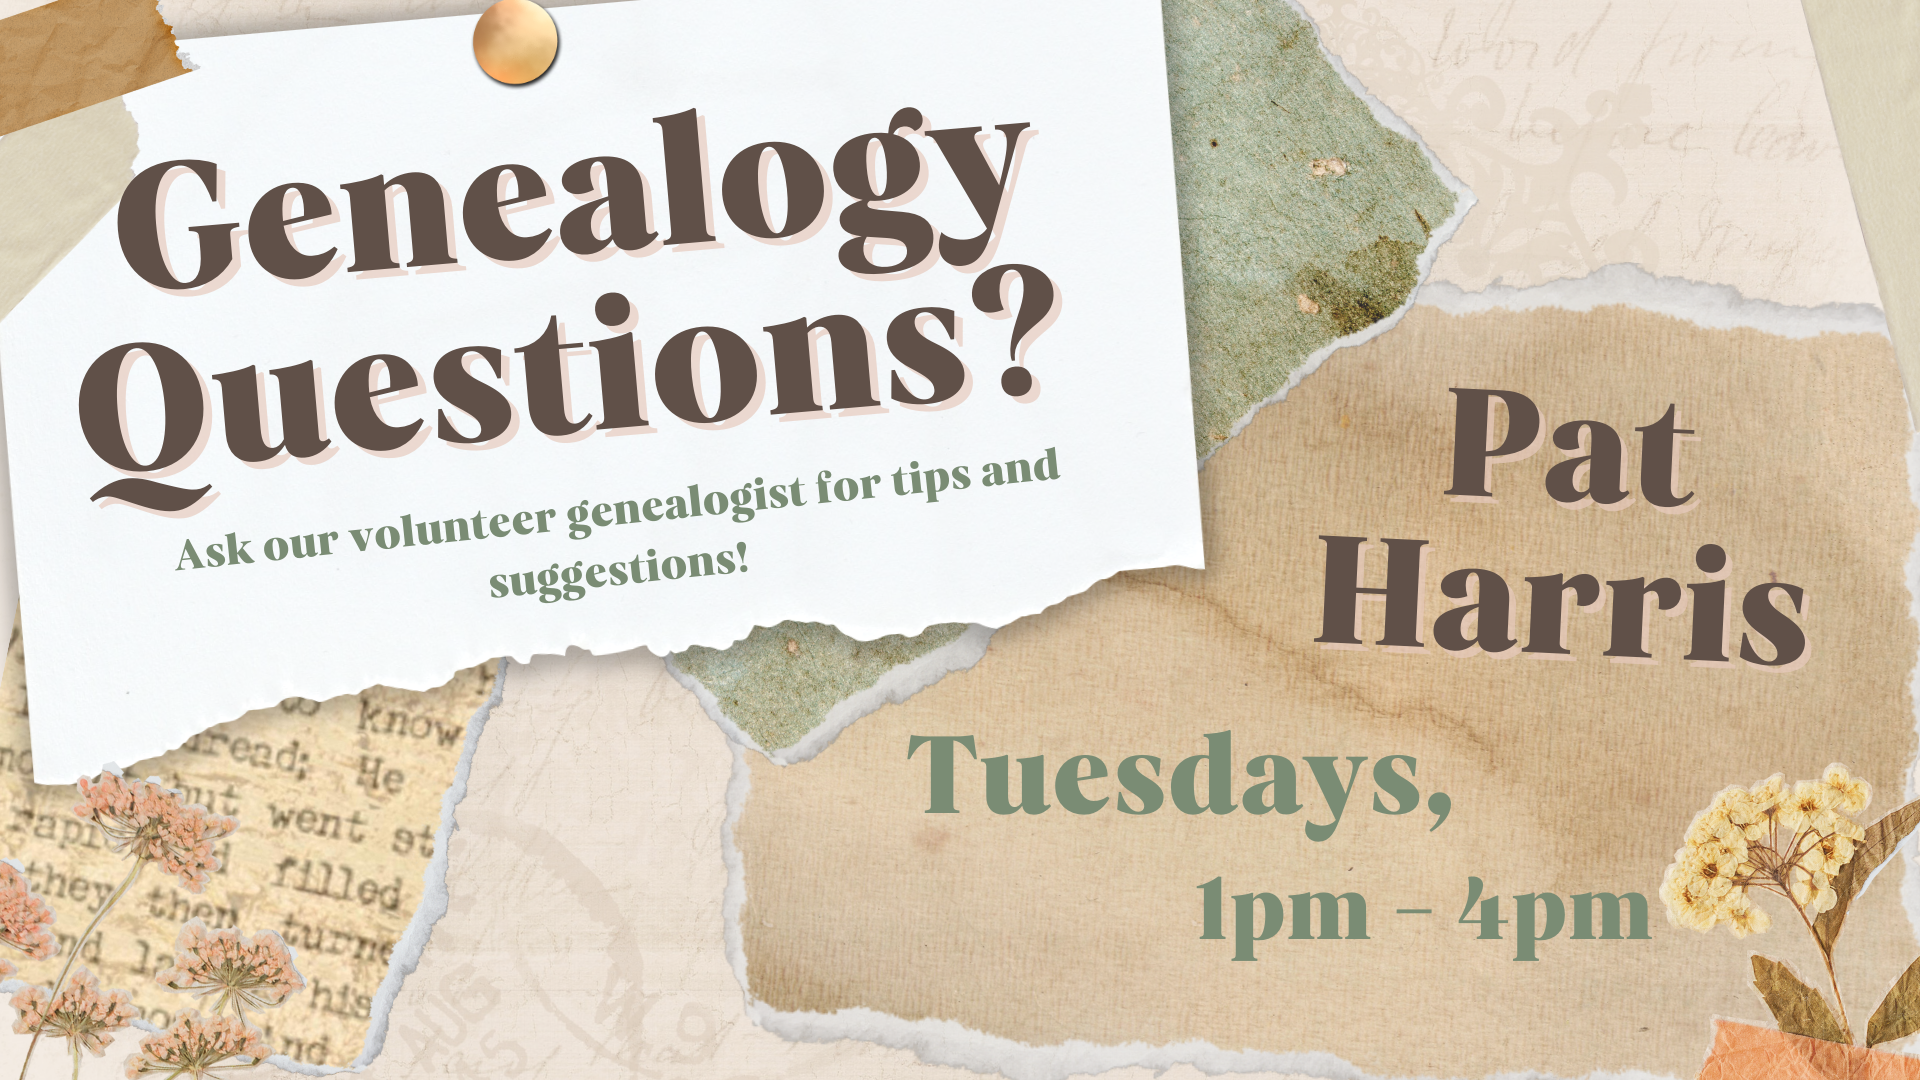 Genealogy questions? As Pat Harris on Tuesdays, 1 - 4 pm